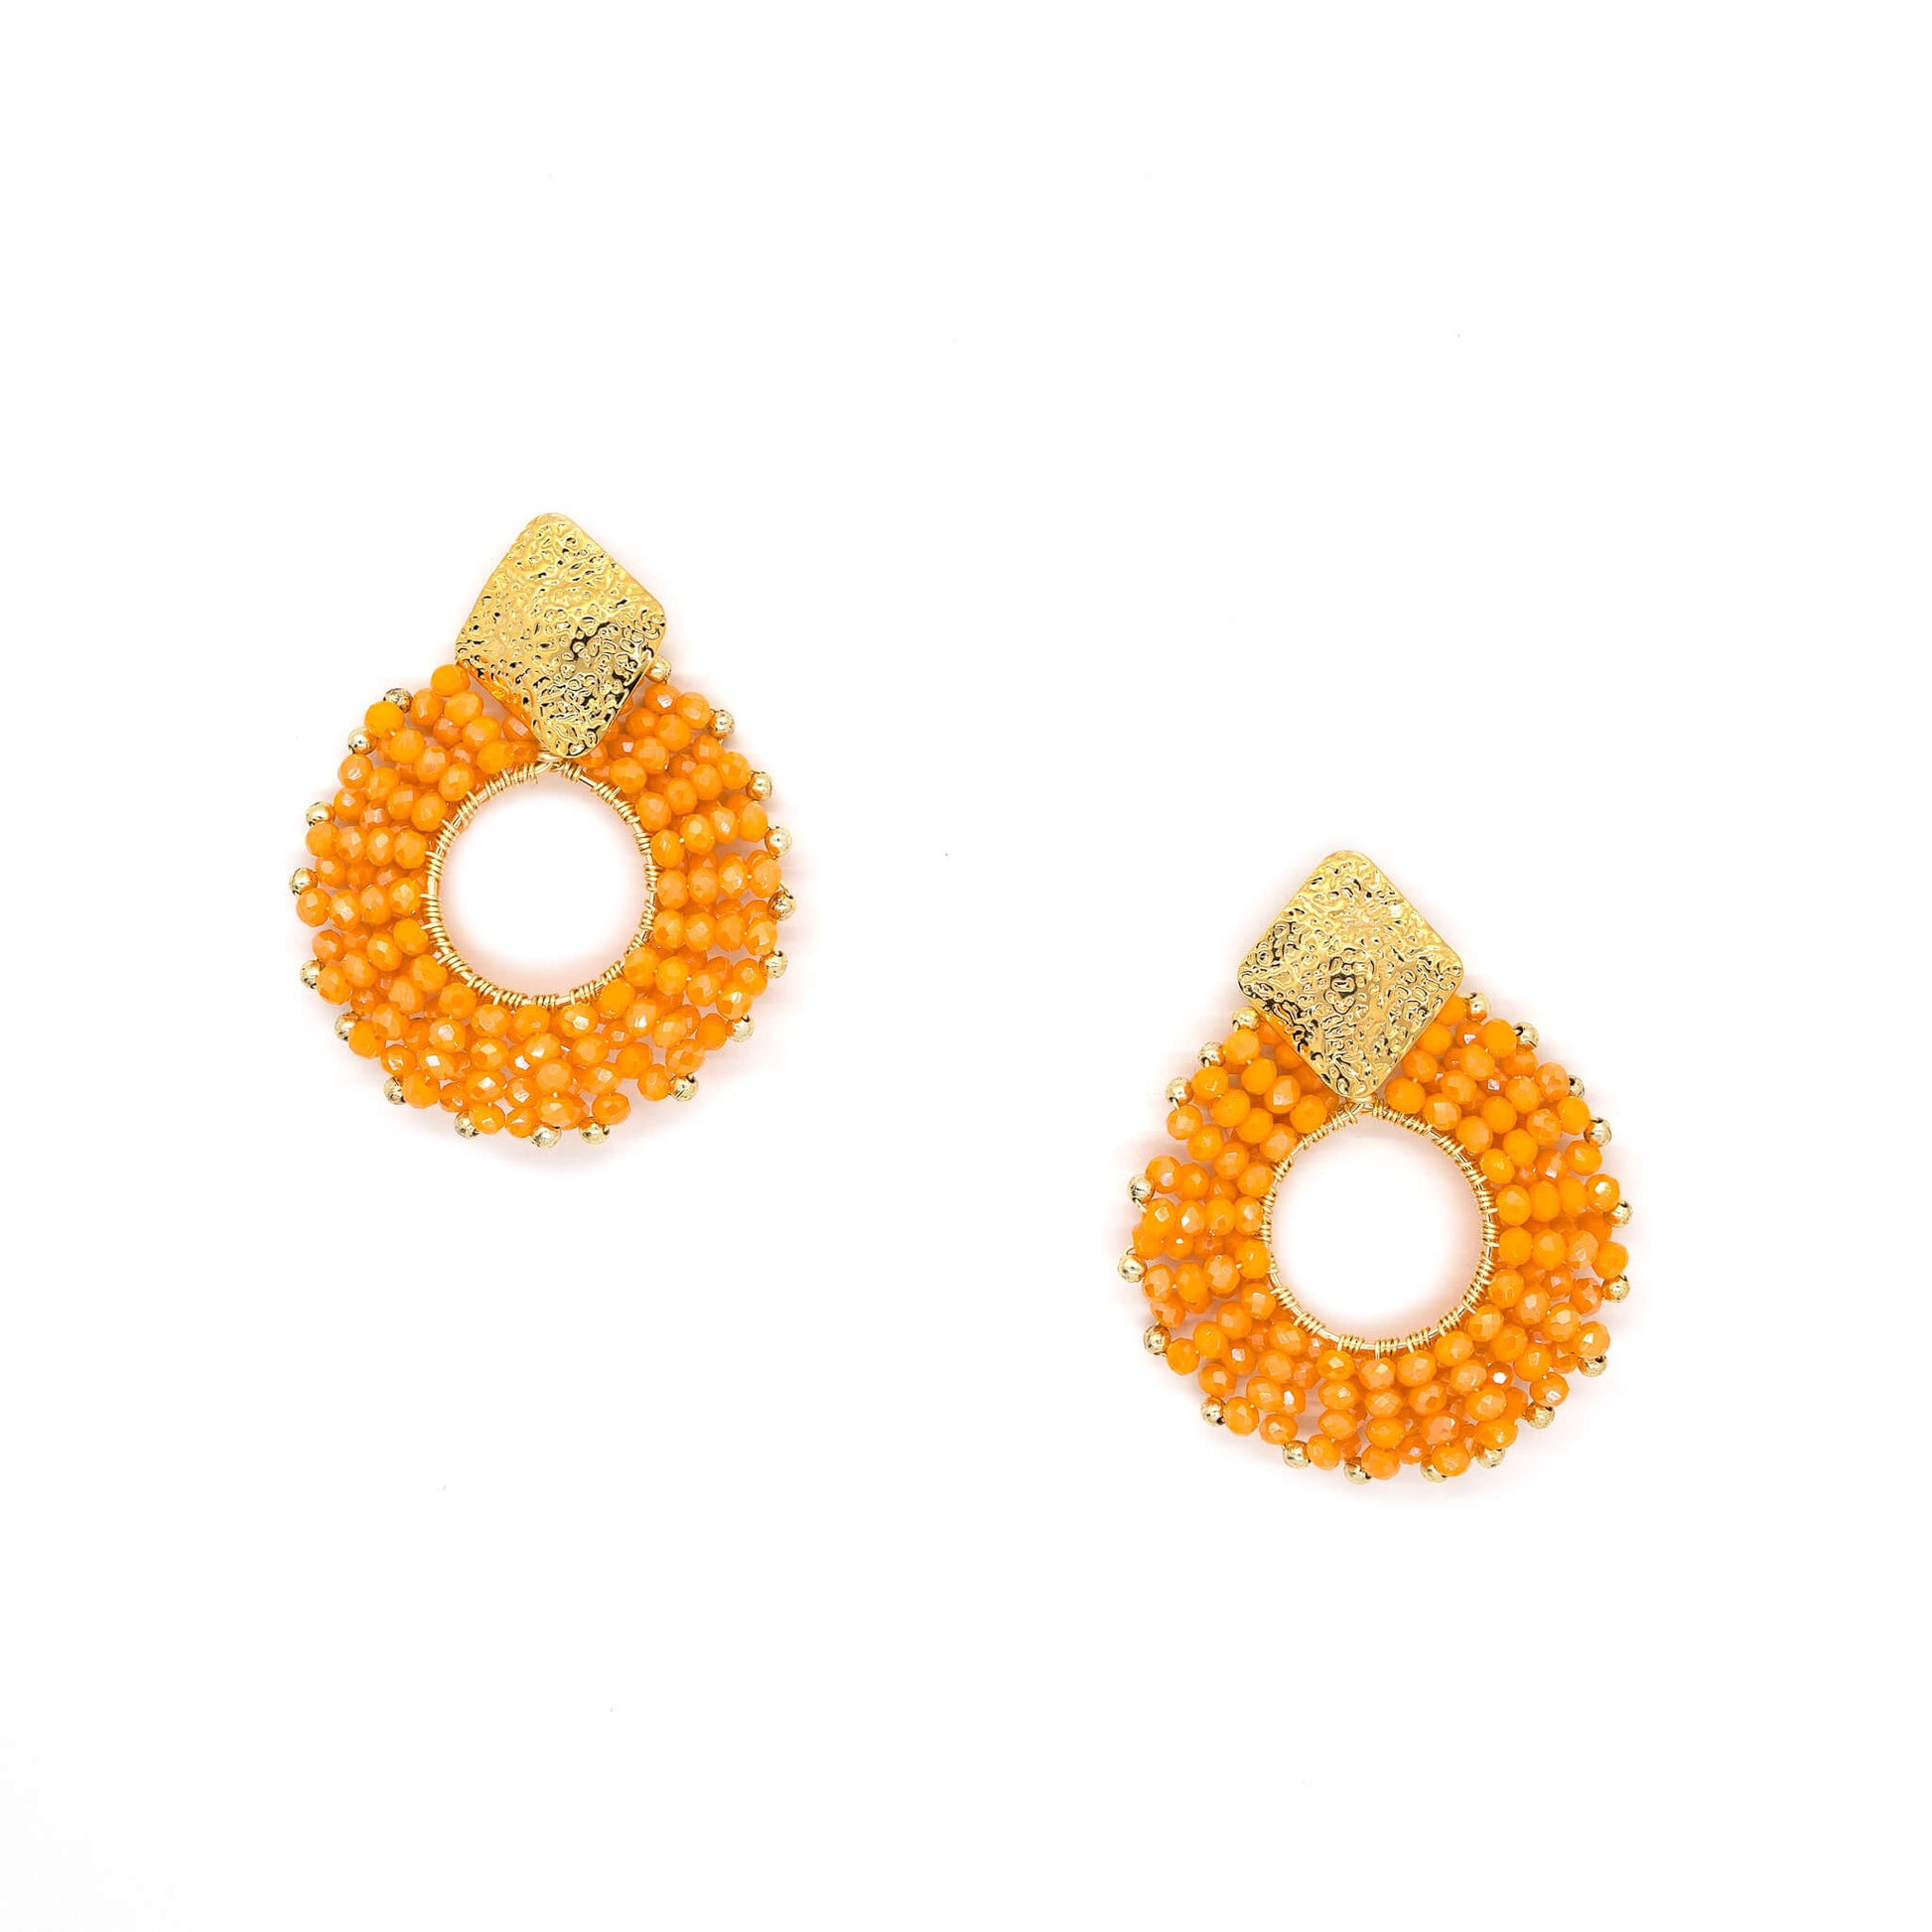 The Evry stud Earrings are 2 inches long. Gold and Orange Earrings. Lightweight and comfortable simple earrings. Handmade for women. Gold beaded earrings